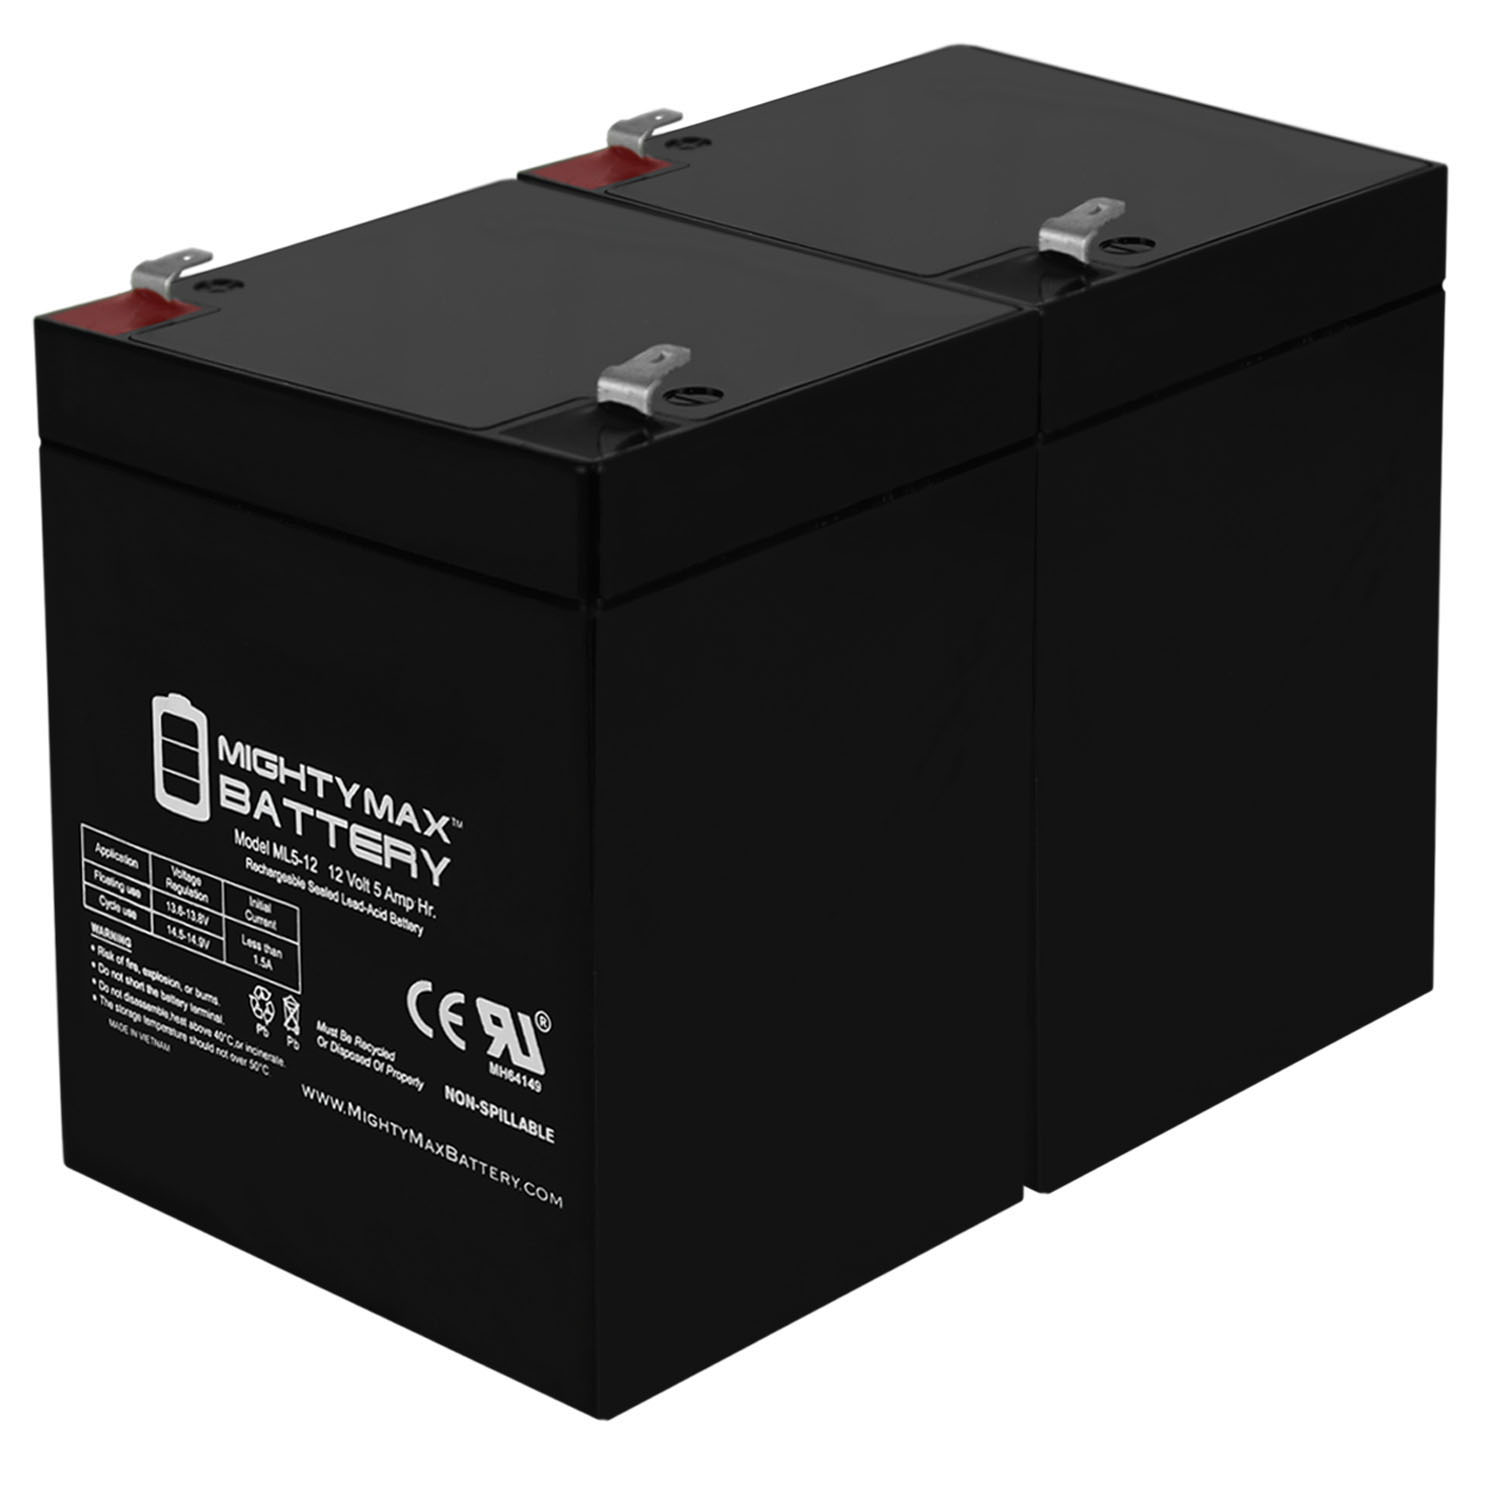 12V 5AH SLA Replacement Battery for Universal Power UB1250 - 2 Pack